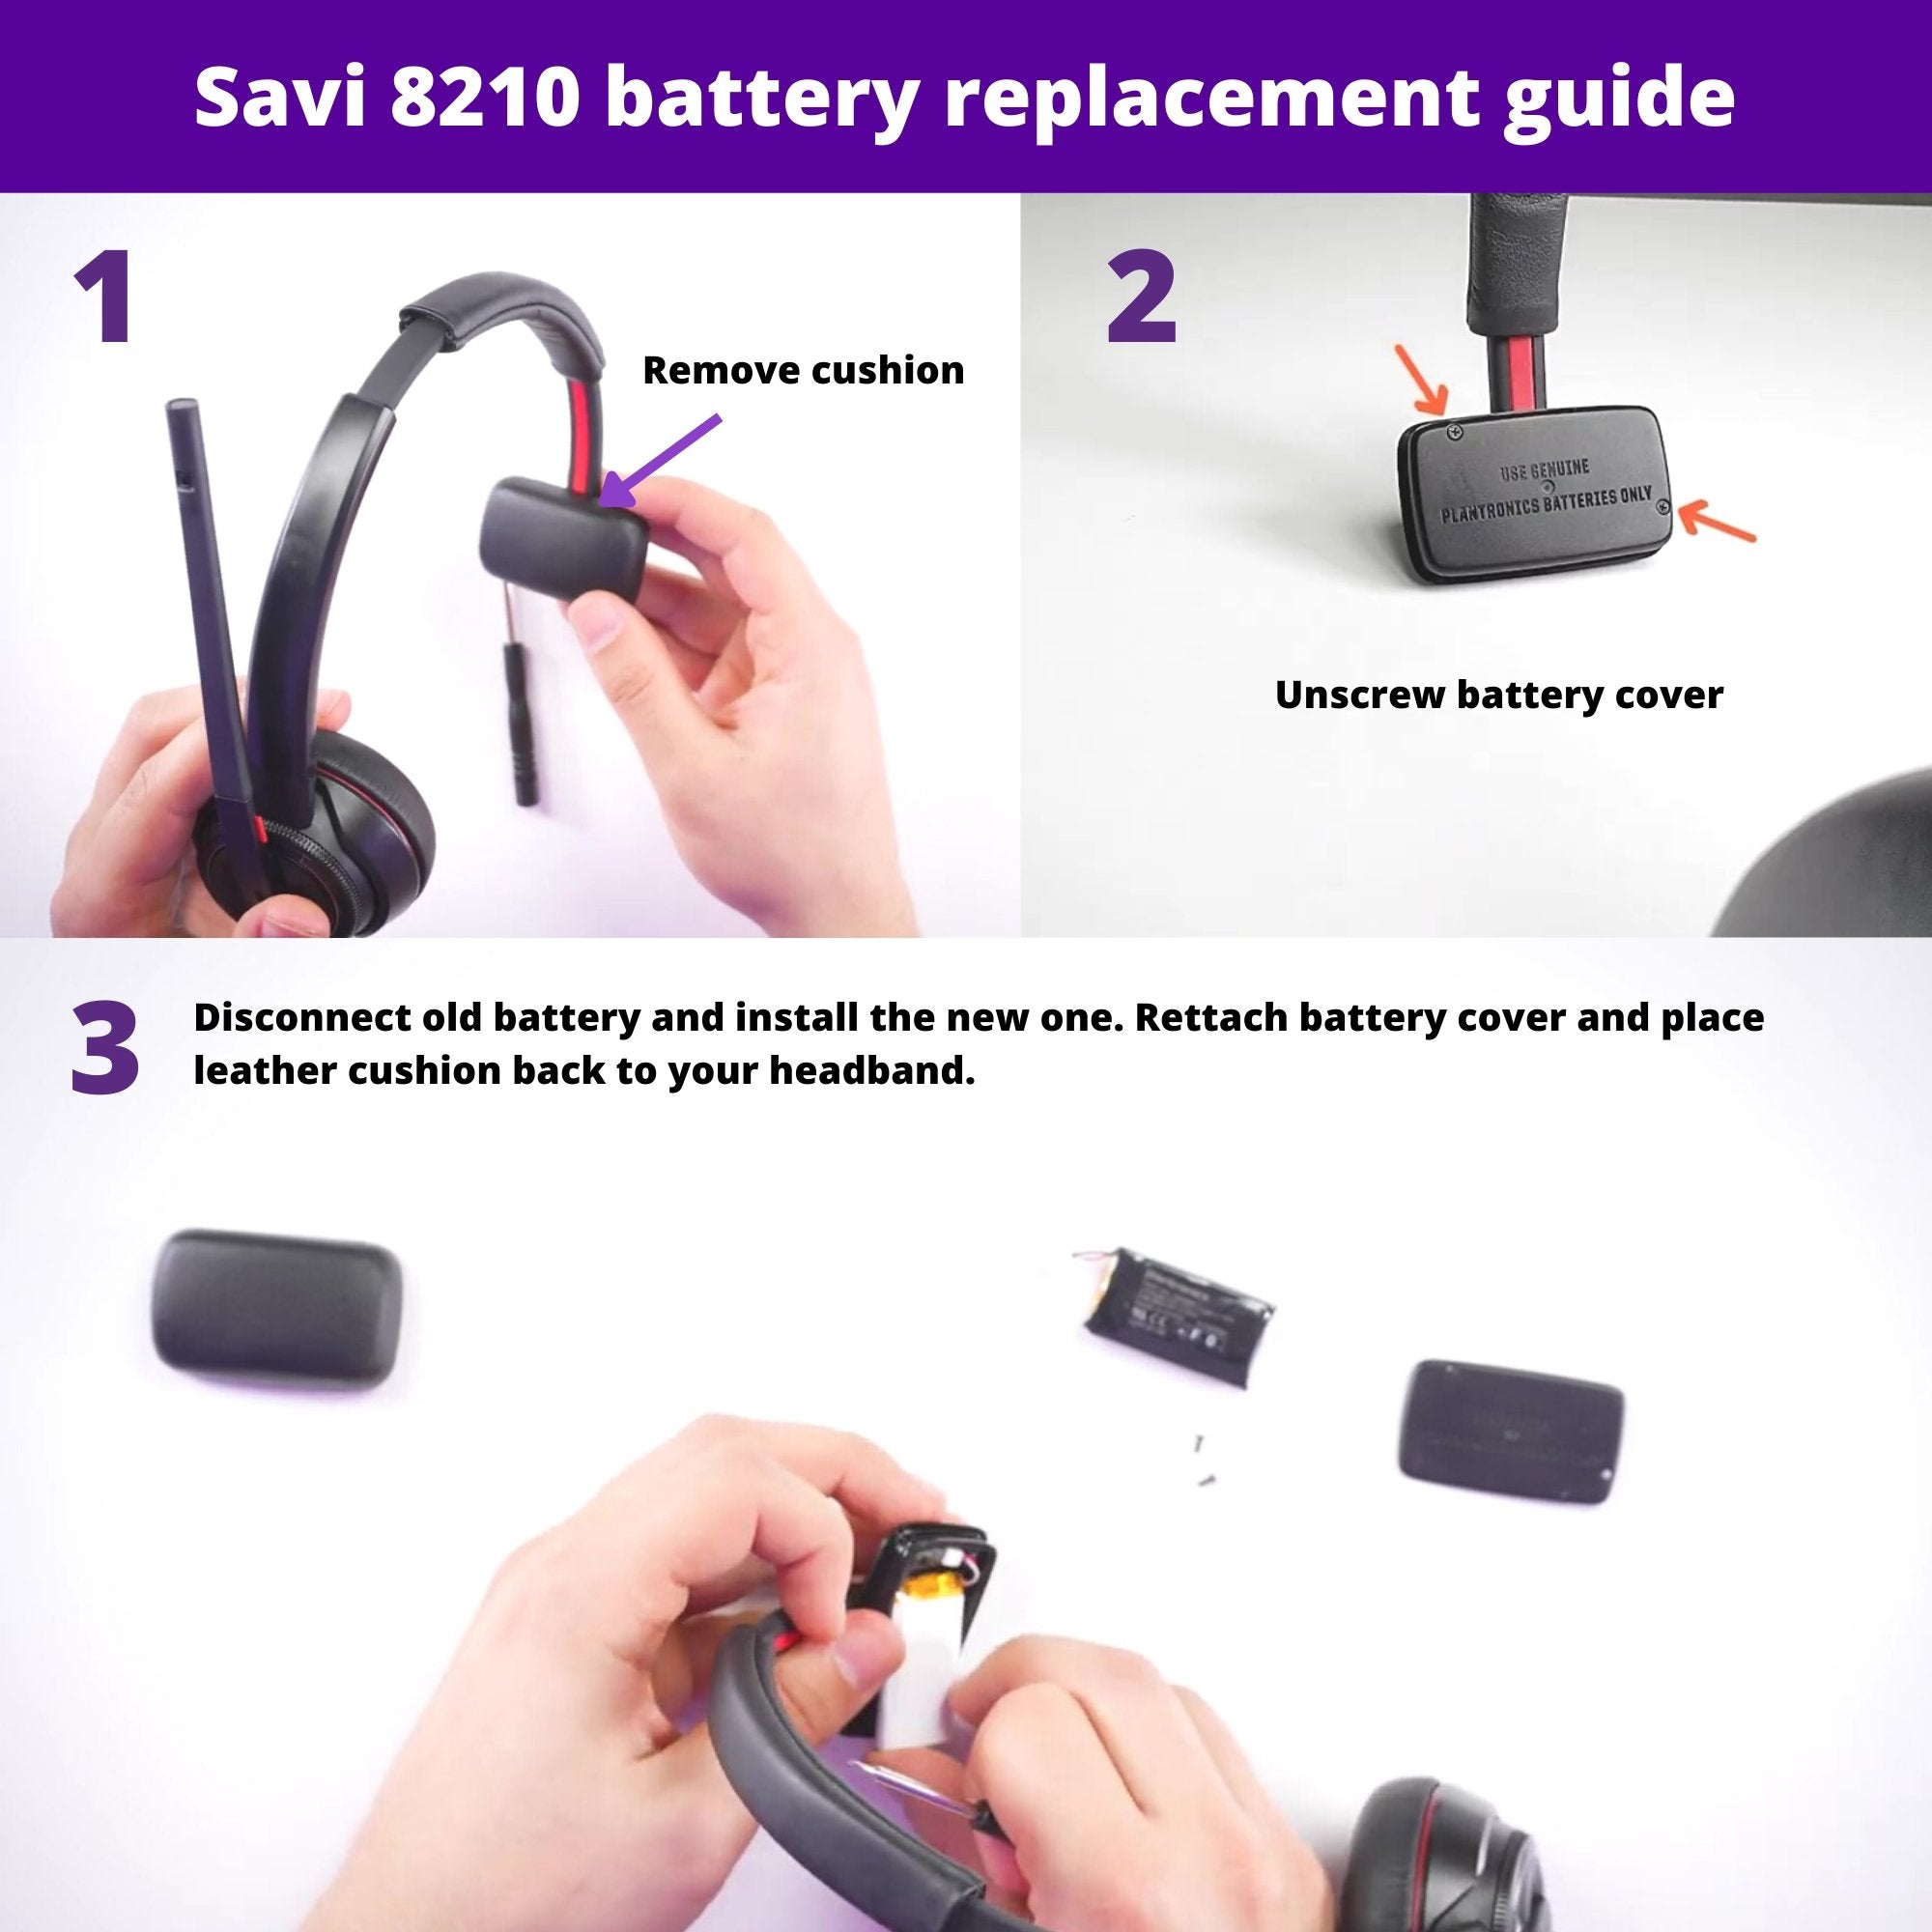 Compatible Replacement Battery For Plantronics Savi 8210 Wireless Headset- Includes Screwdriver - Headset Advisor